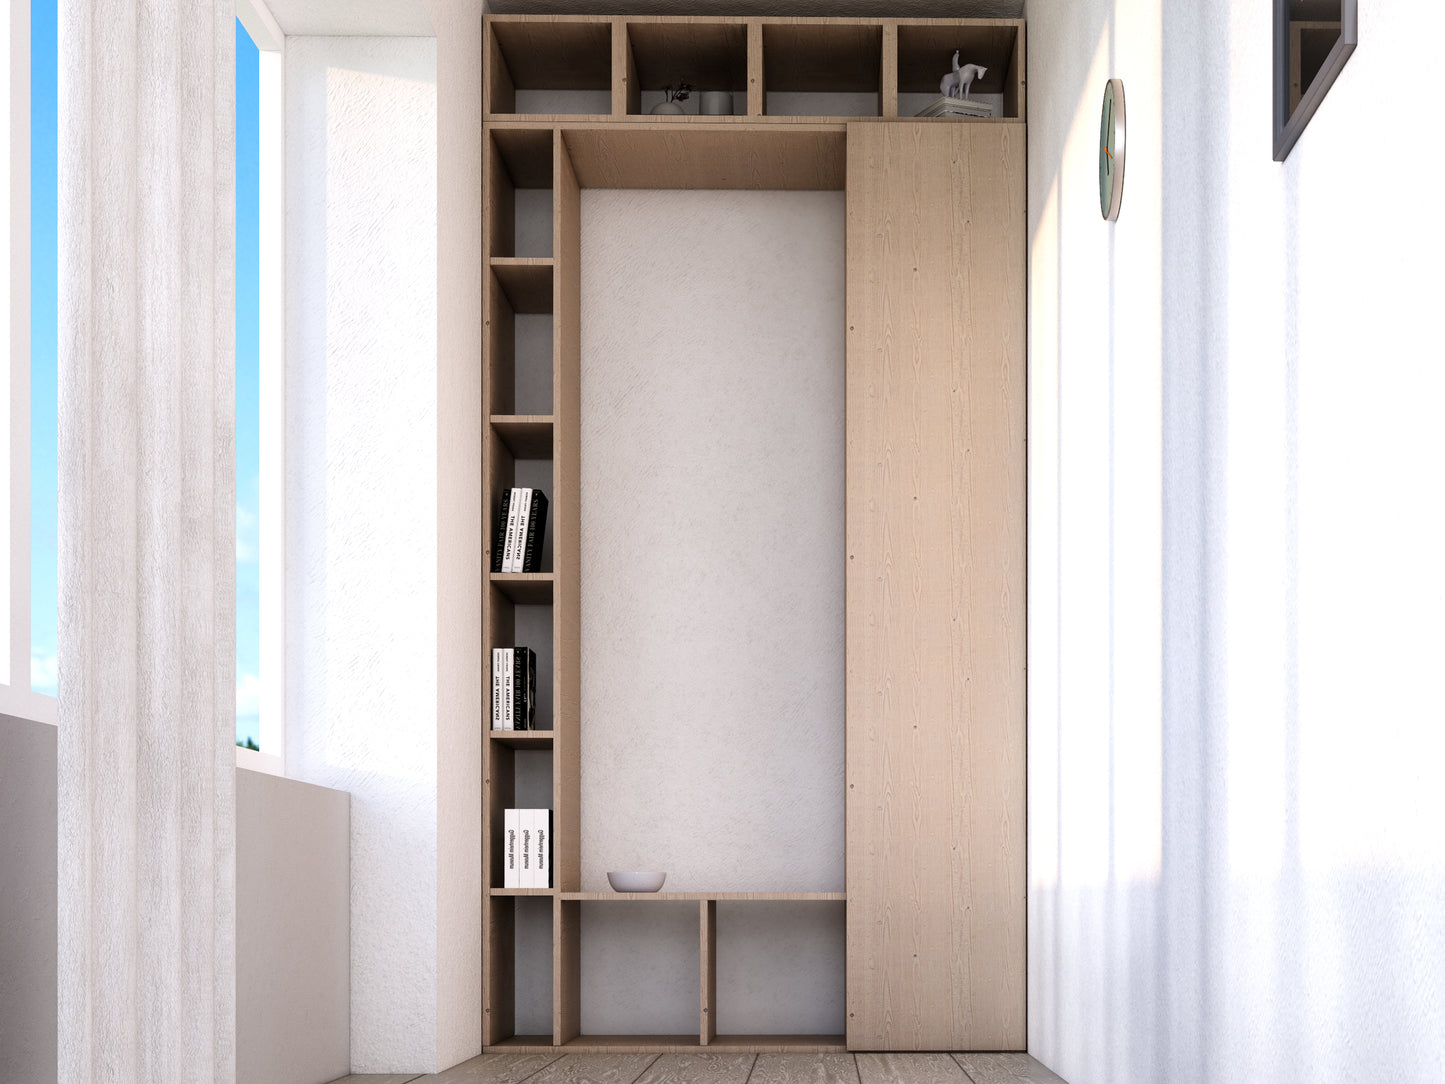 107x56 Inch DIY MDF Storage Unit with Shelves, Cabinet, and Bench